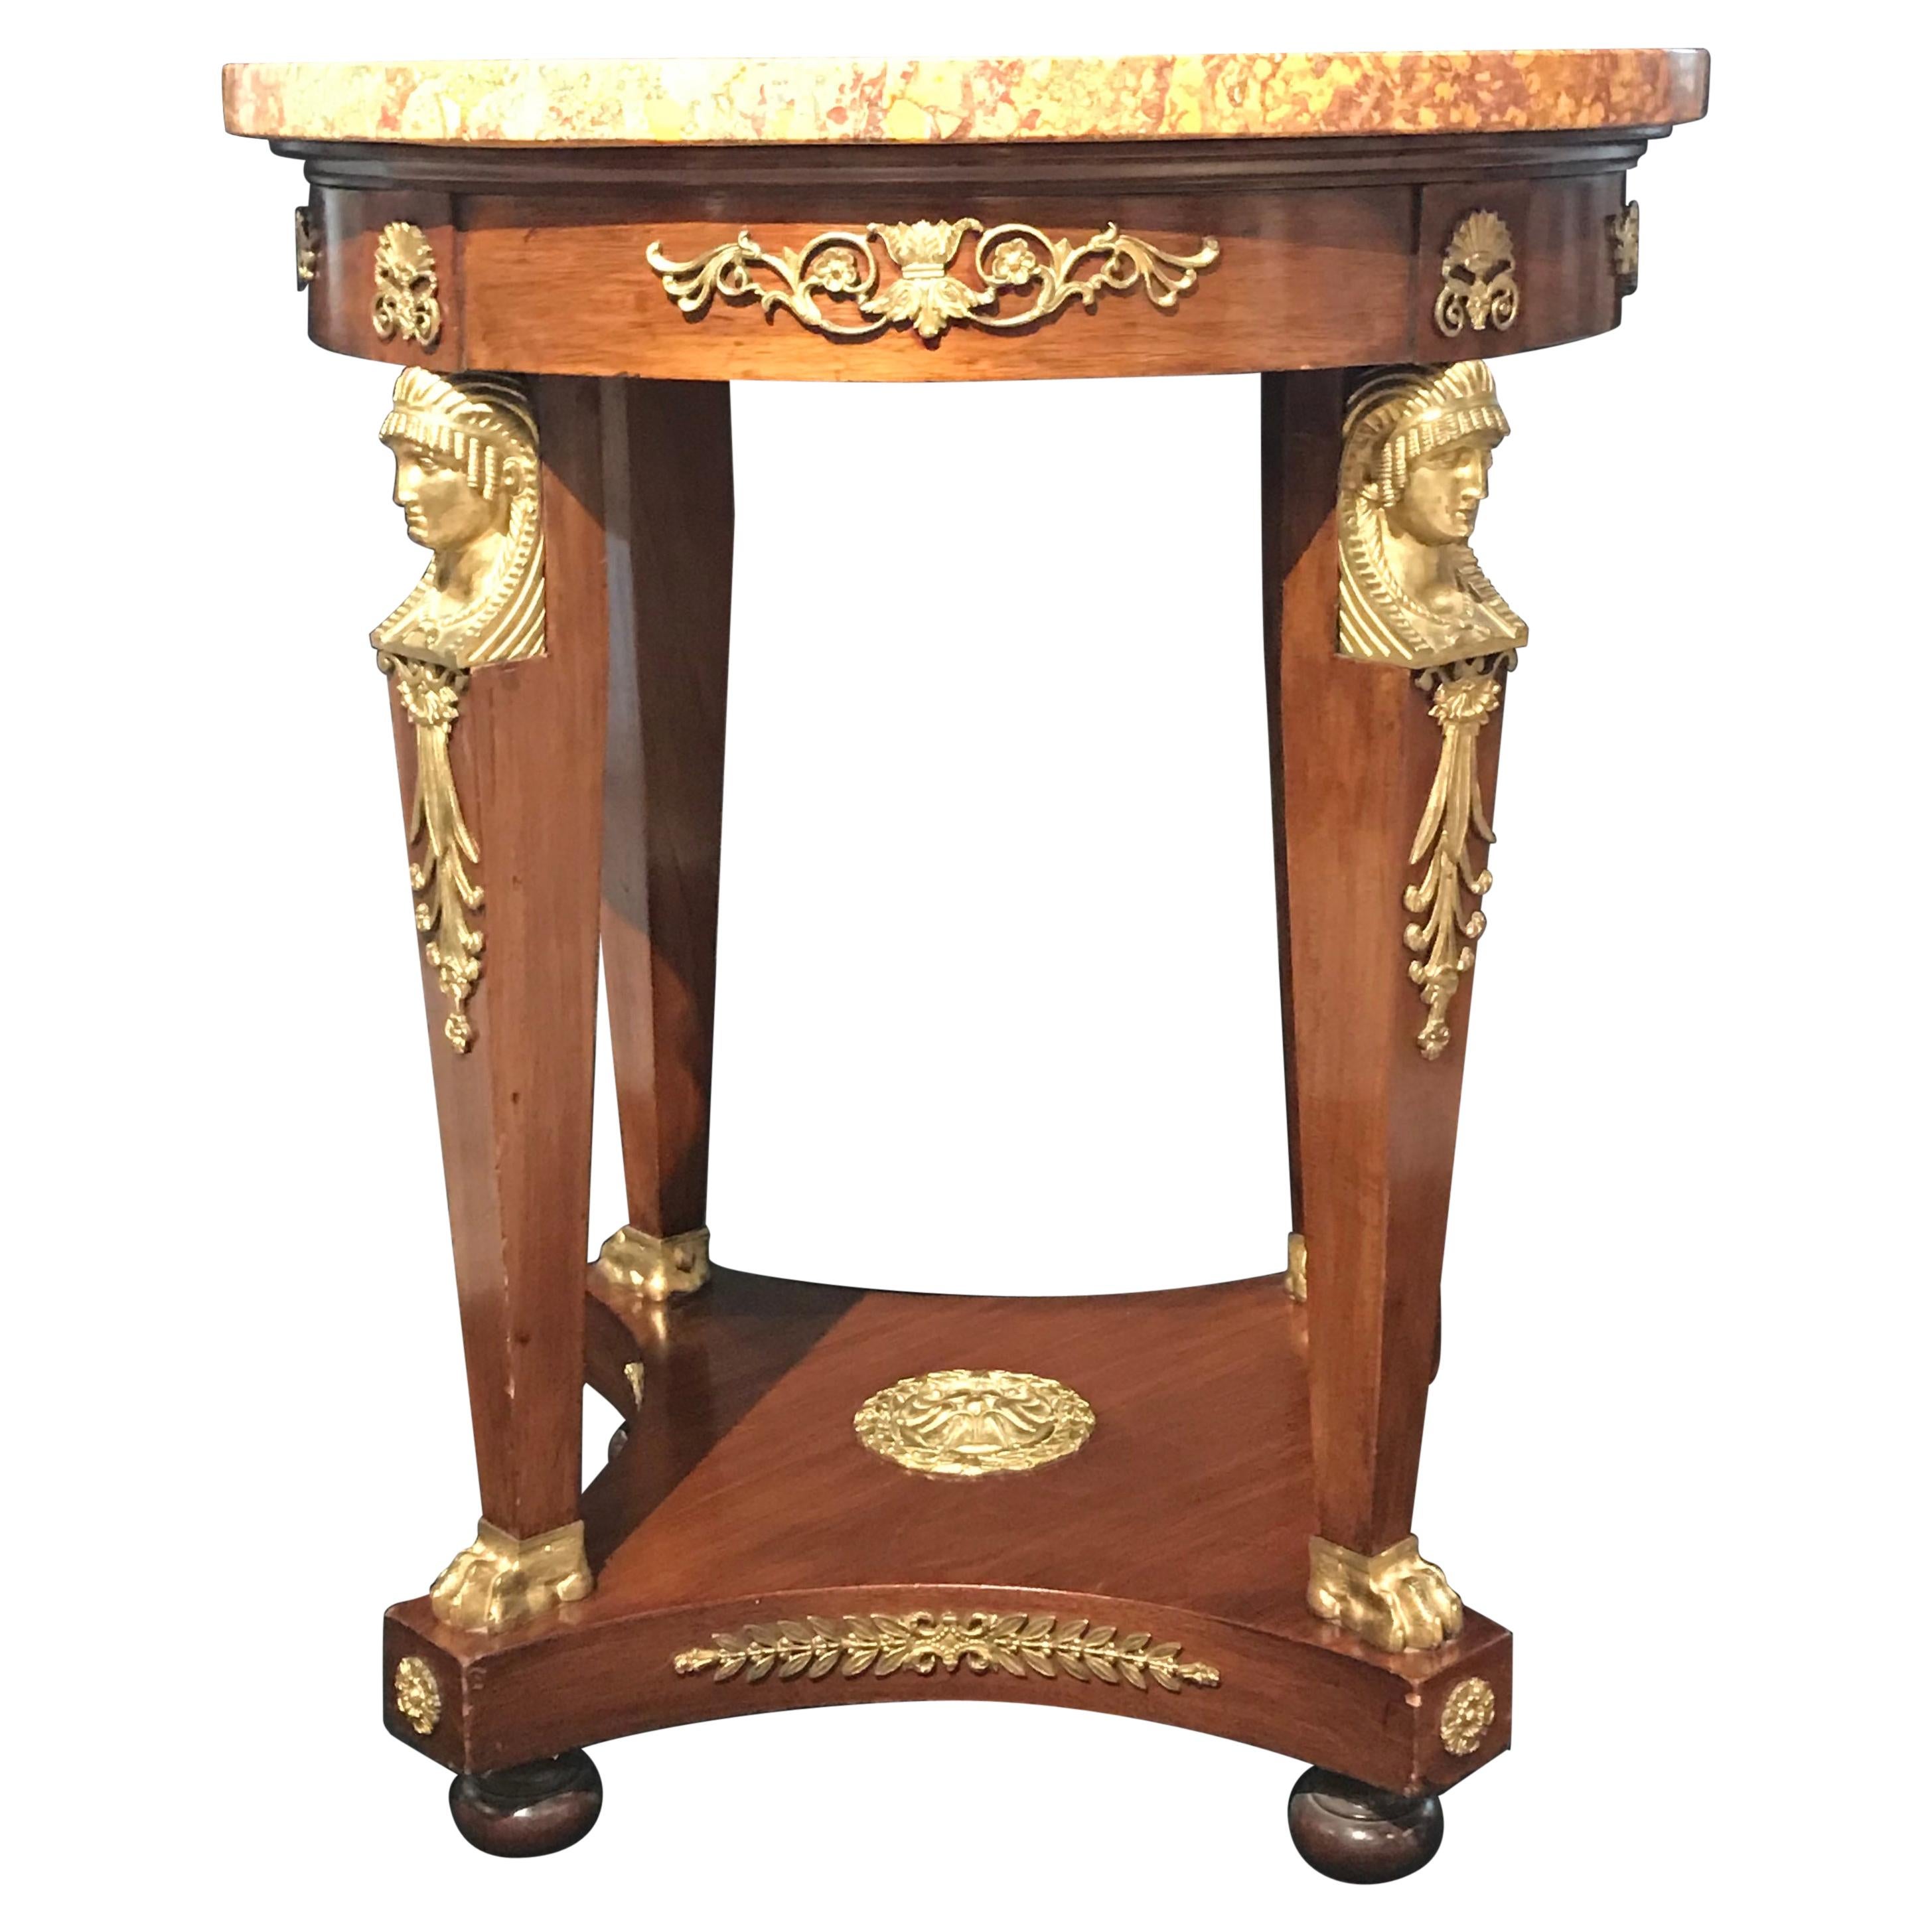 Late 19th Century Rococo Marble Topped Mahogany & Ormolu Mounted Centre Table